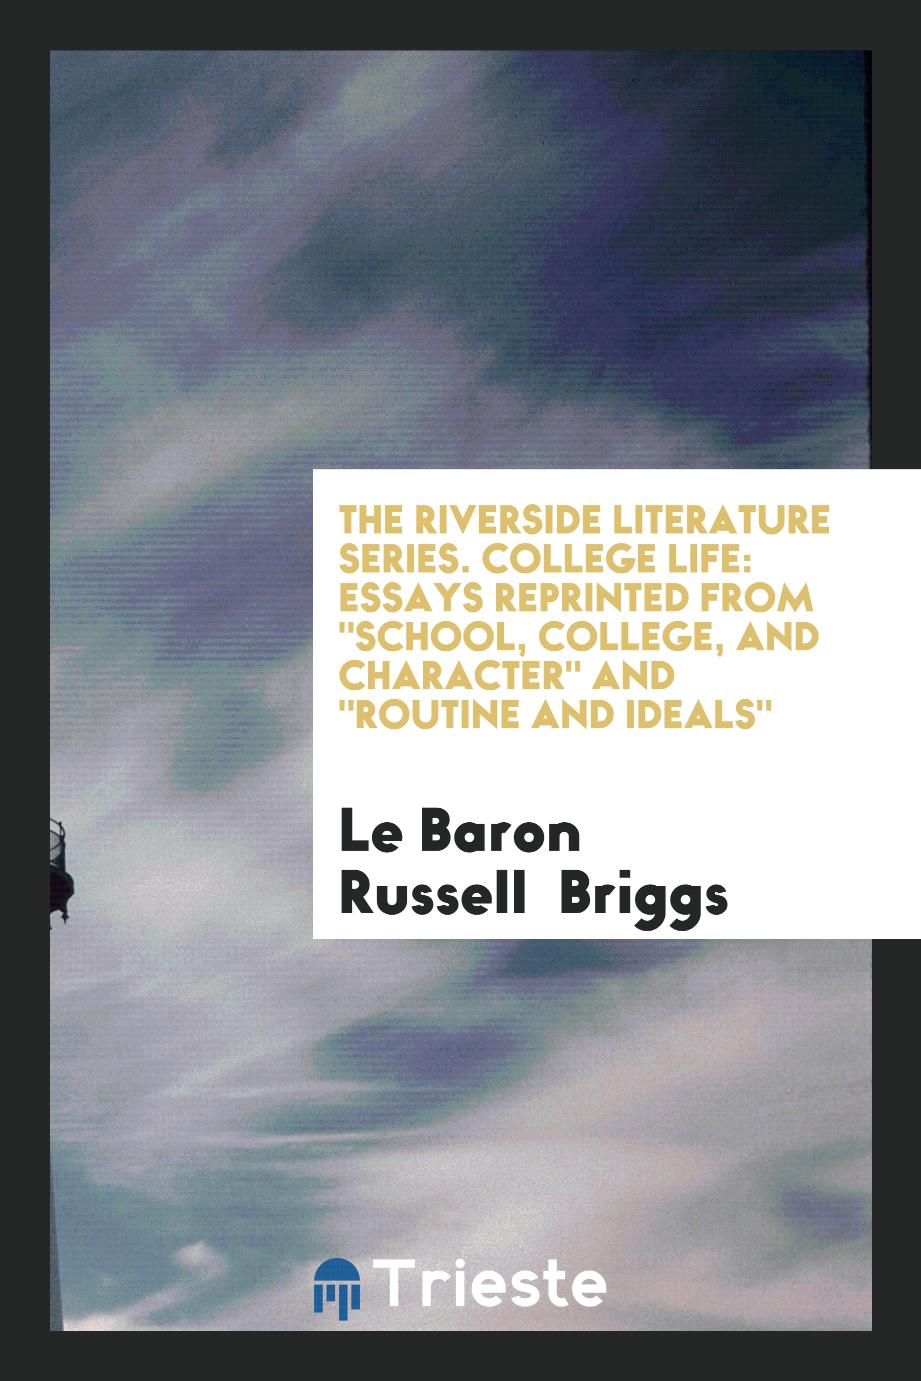 The Riverside Literature Series. College Life: Essays Reprinted from "School, College, and Character" and "Routine and Ideals"